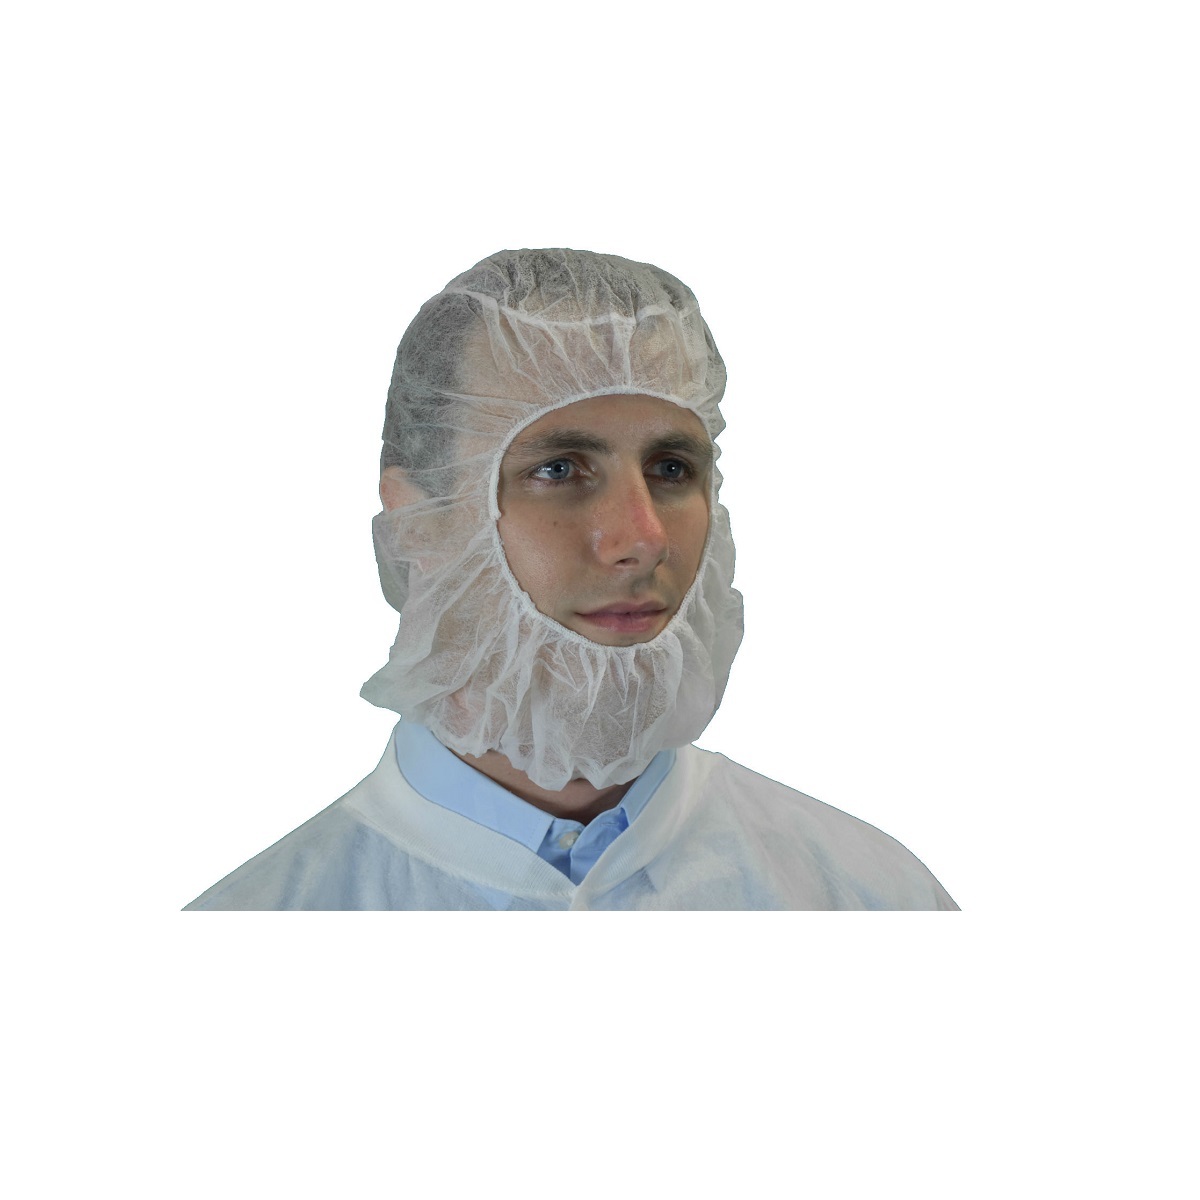 Keystone Safety® One Size Fits Most White Latex Free Polypropylene Surgical Hood